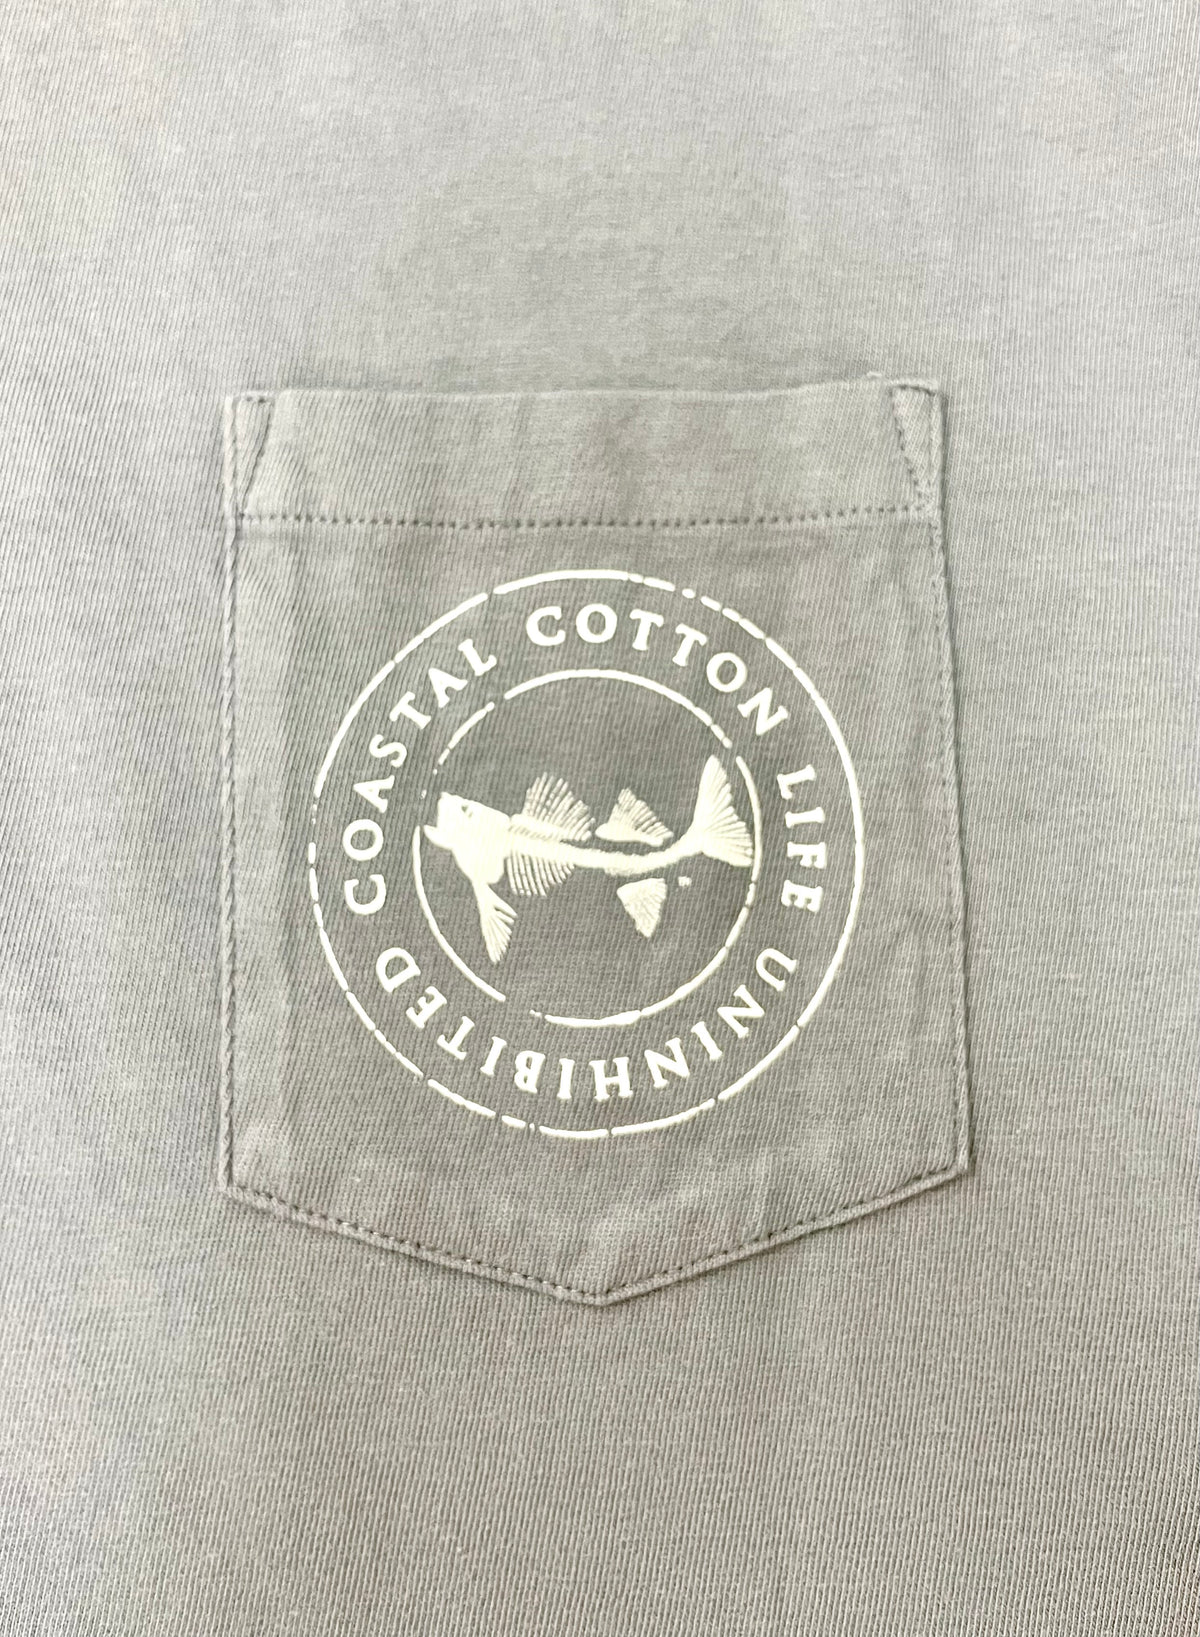 Coastal Cotton Rooster Fish S/S